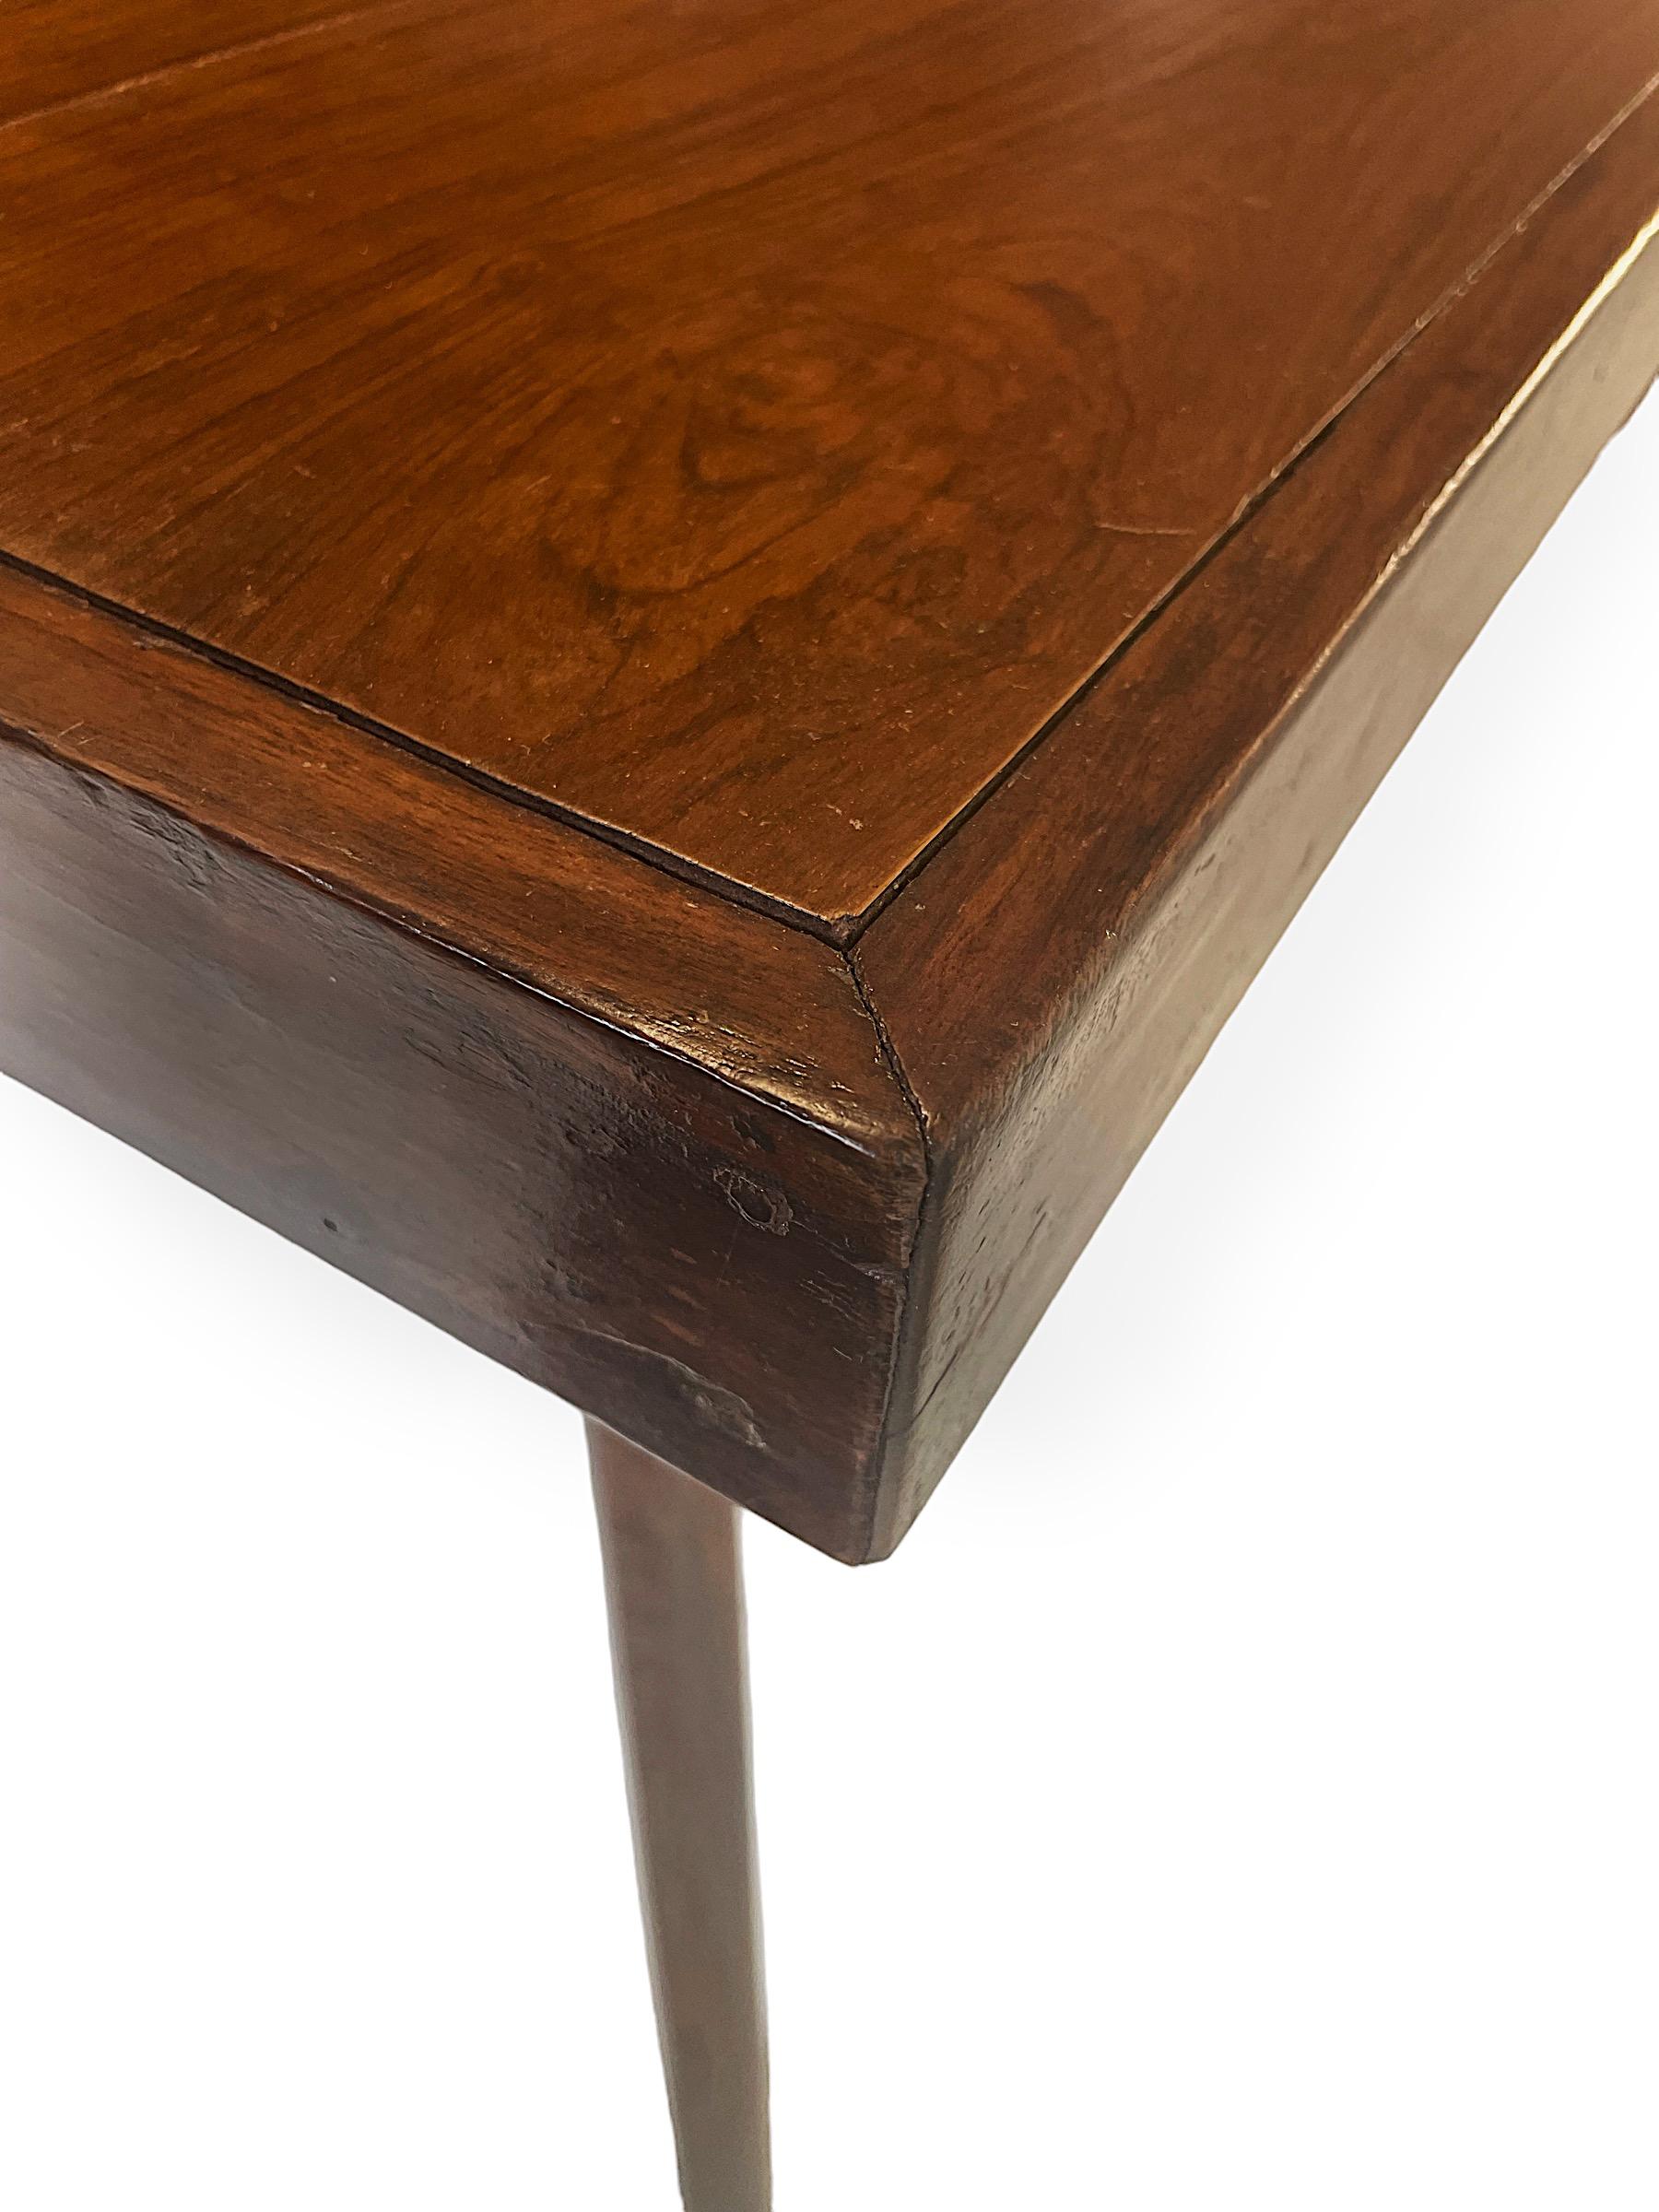 Mid-20th Century Pierre Jeanneret Rosewood Table PJ-TA-01-A For Sale